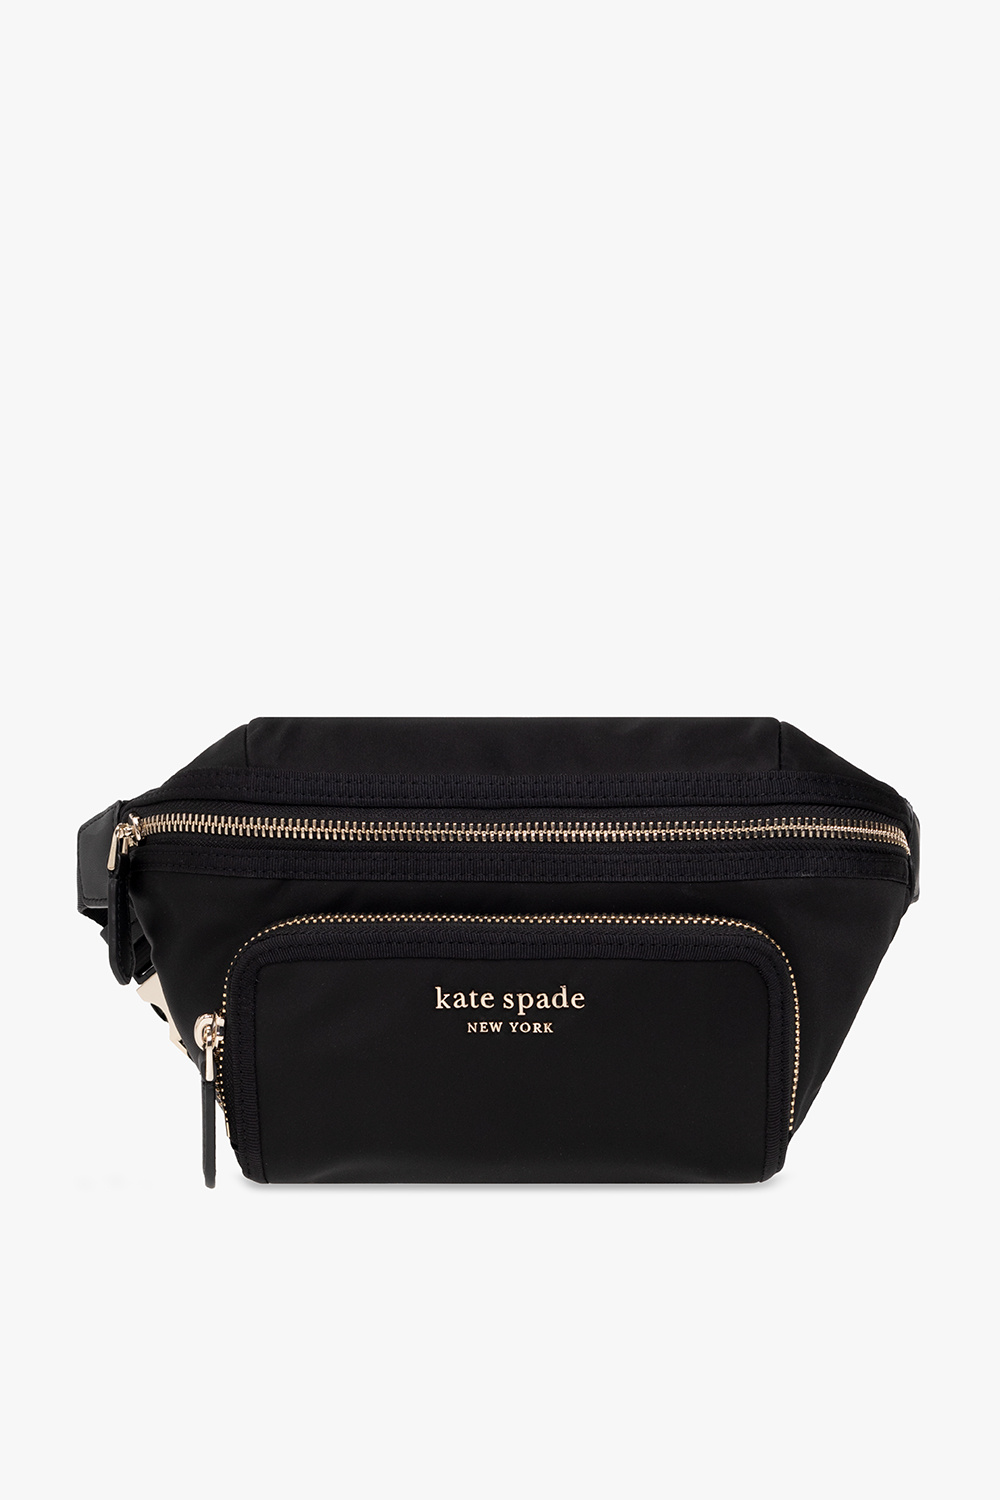 NWT Kate Spade New York Leila Leather Belt Bag Fanny Pack in pitaschio  AUTHENTIC acekaholdingcomtr